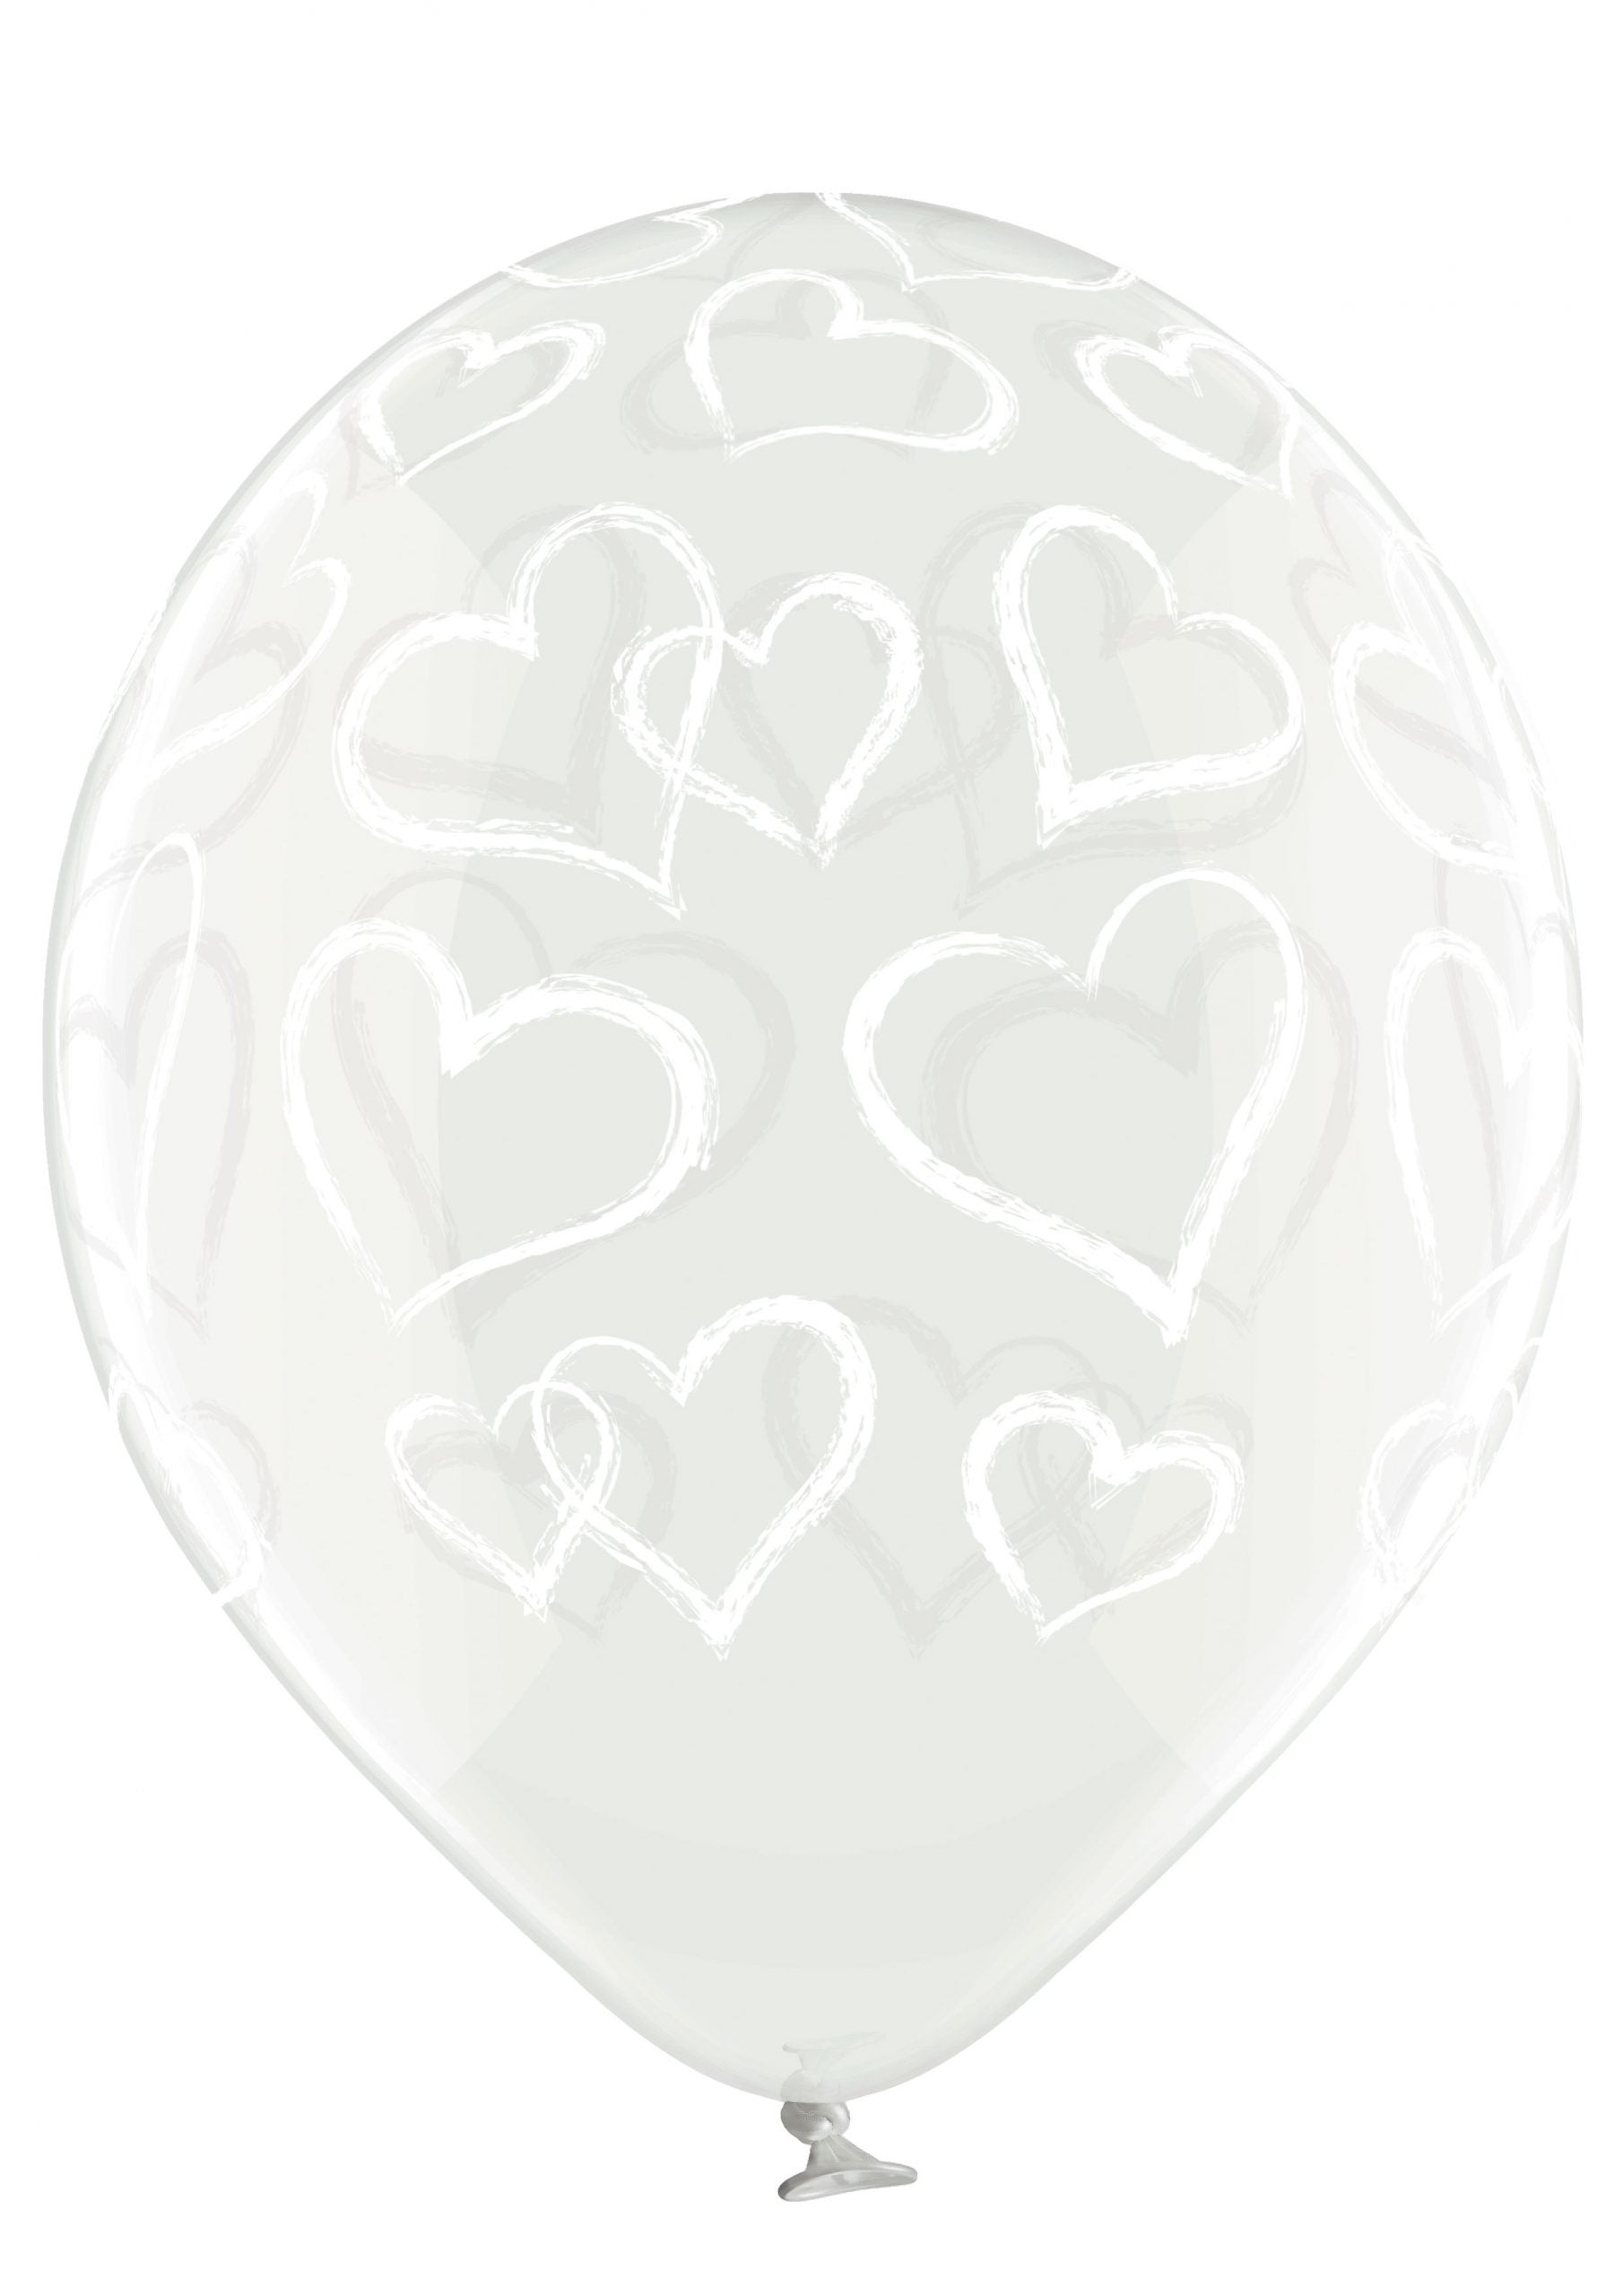 Latex balloon with transparent hearts 1pc